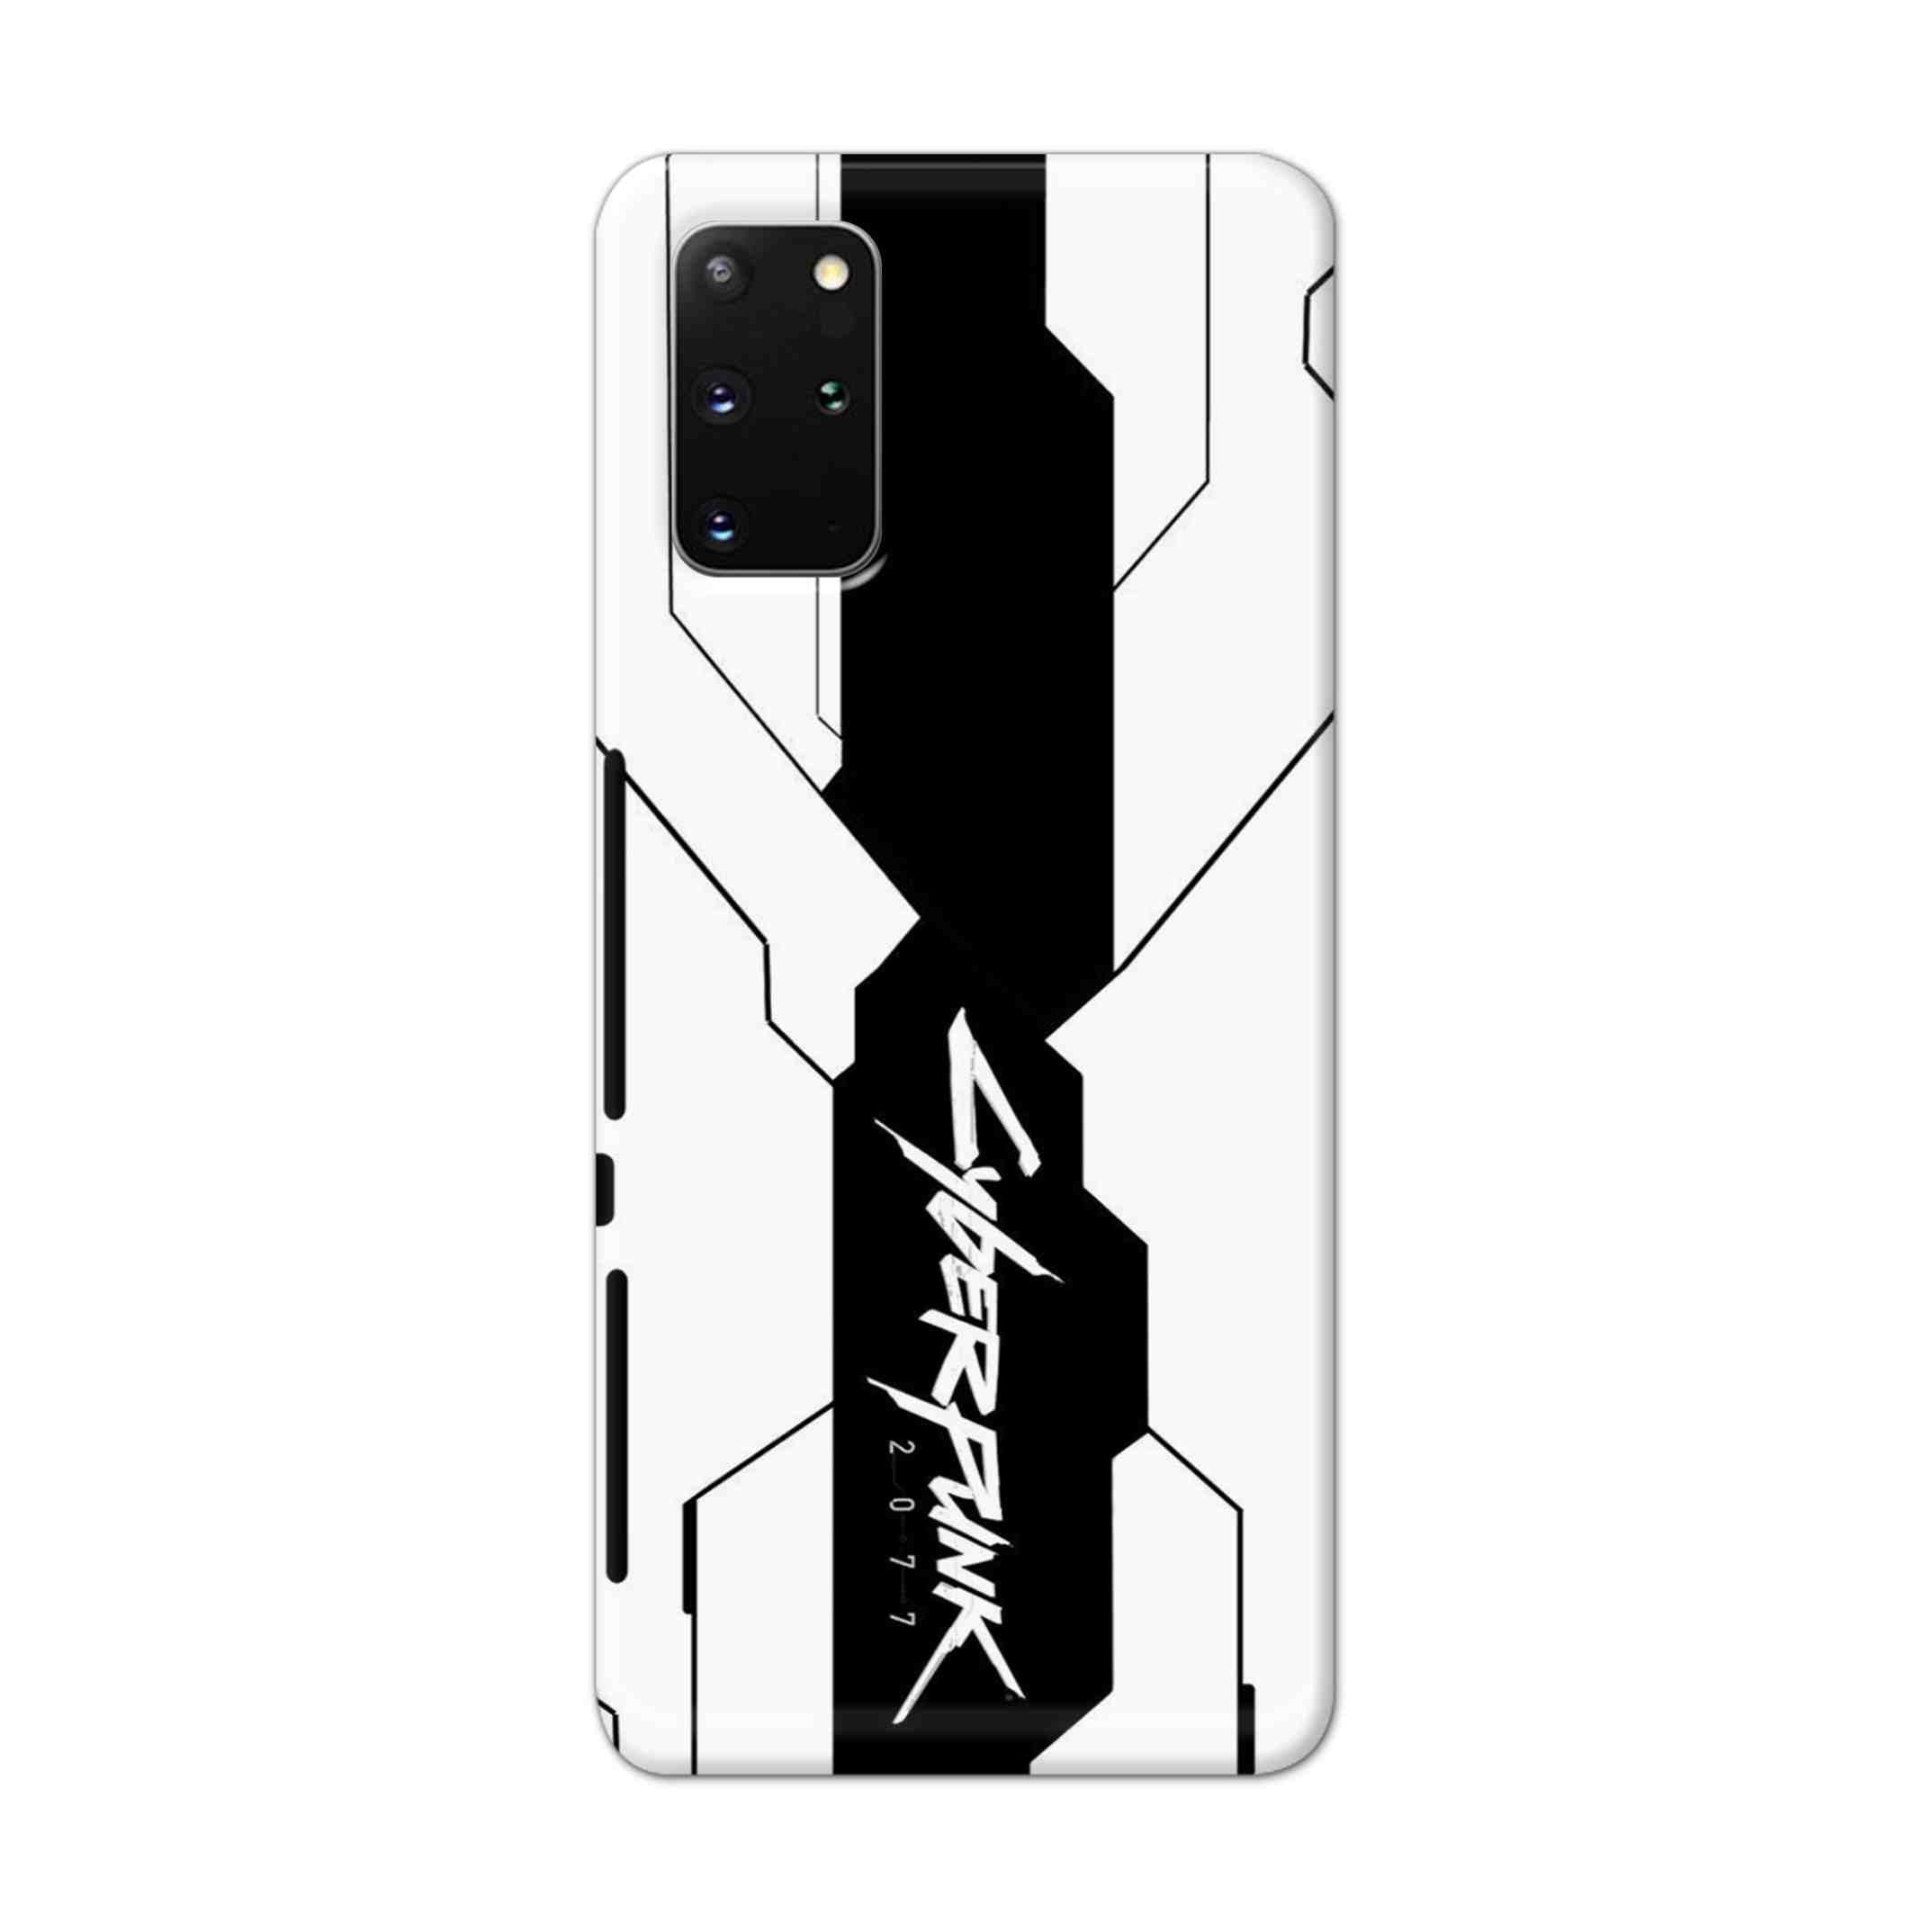 Buy Cyberpunk 2077 Hard Back Mobile Phone Case Cover For Samsung Galaxy S20 Plus Online